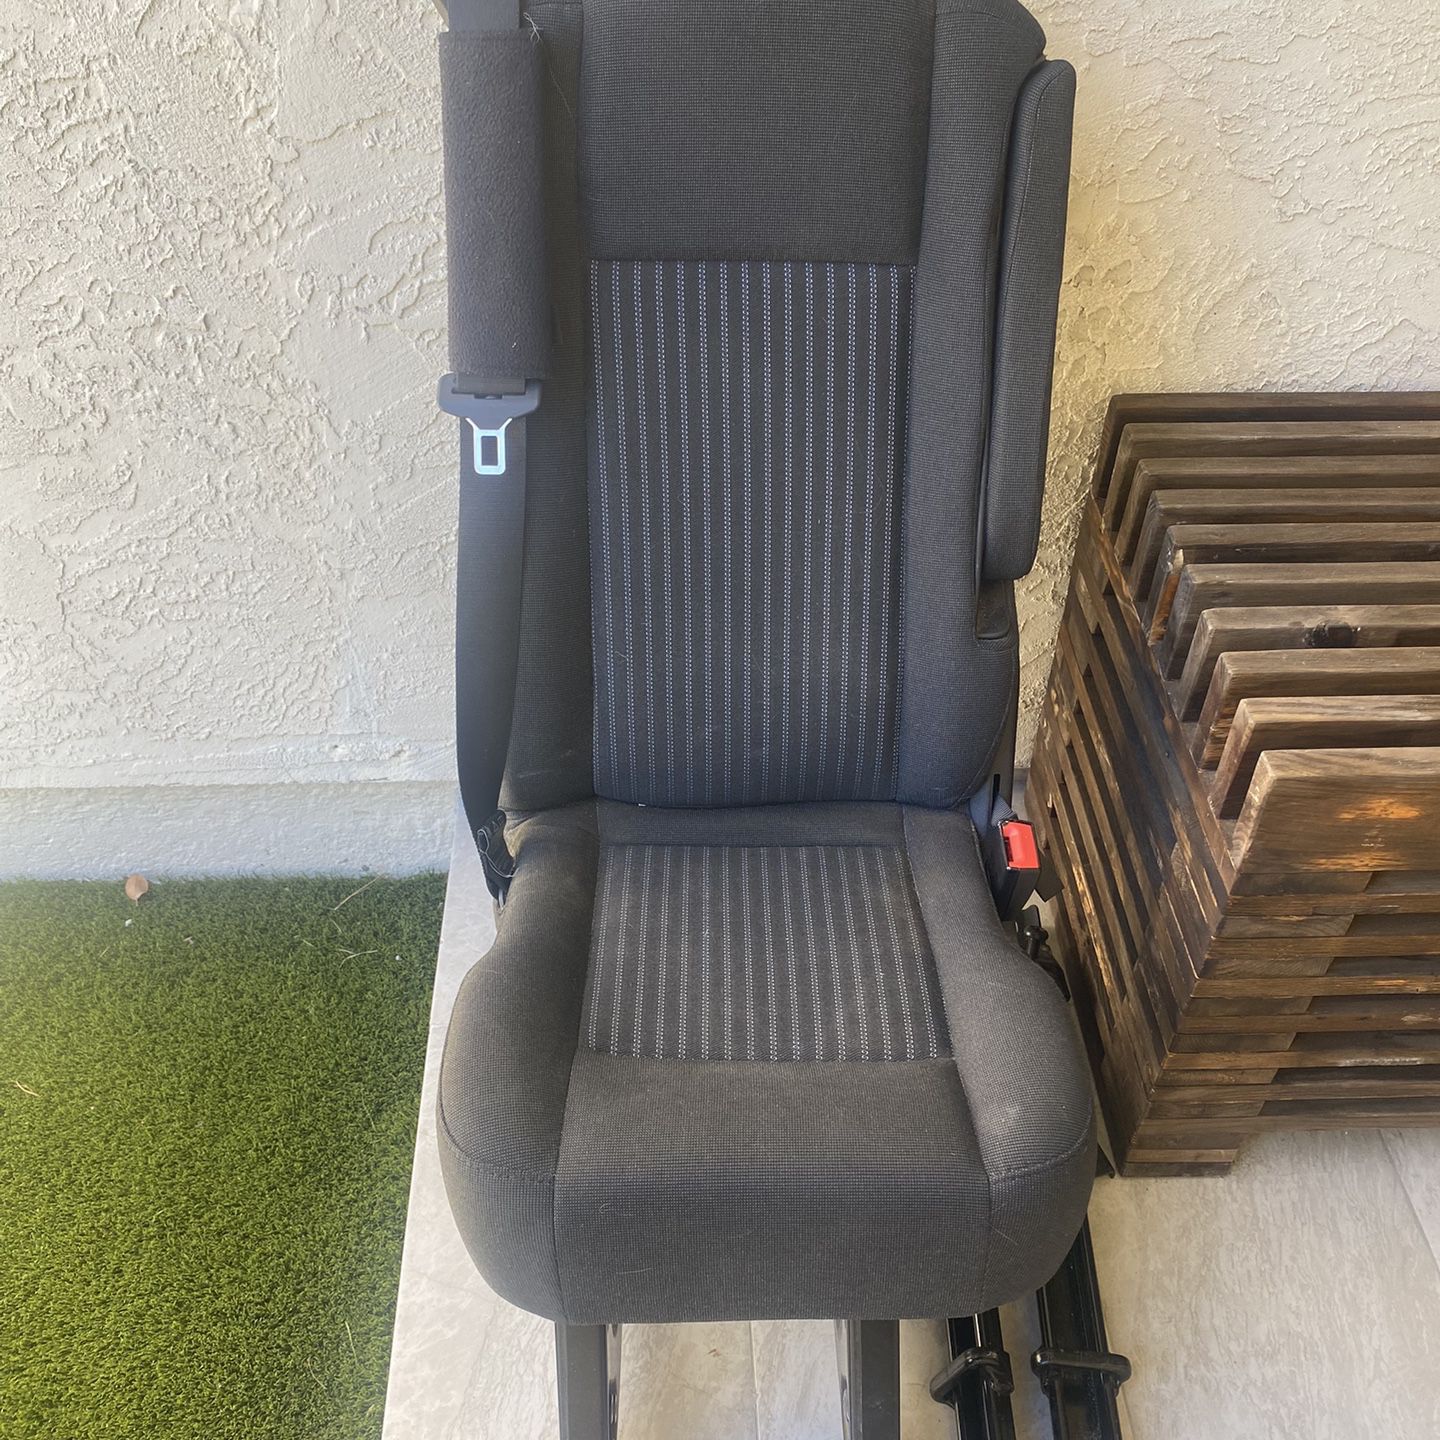 Ford Transit OEM Seat Single Perfect For Van Conversion Sprinter With Rails